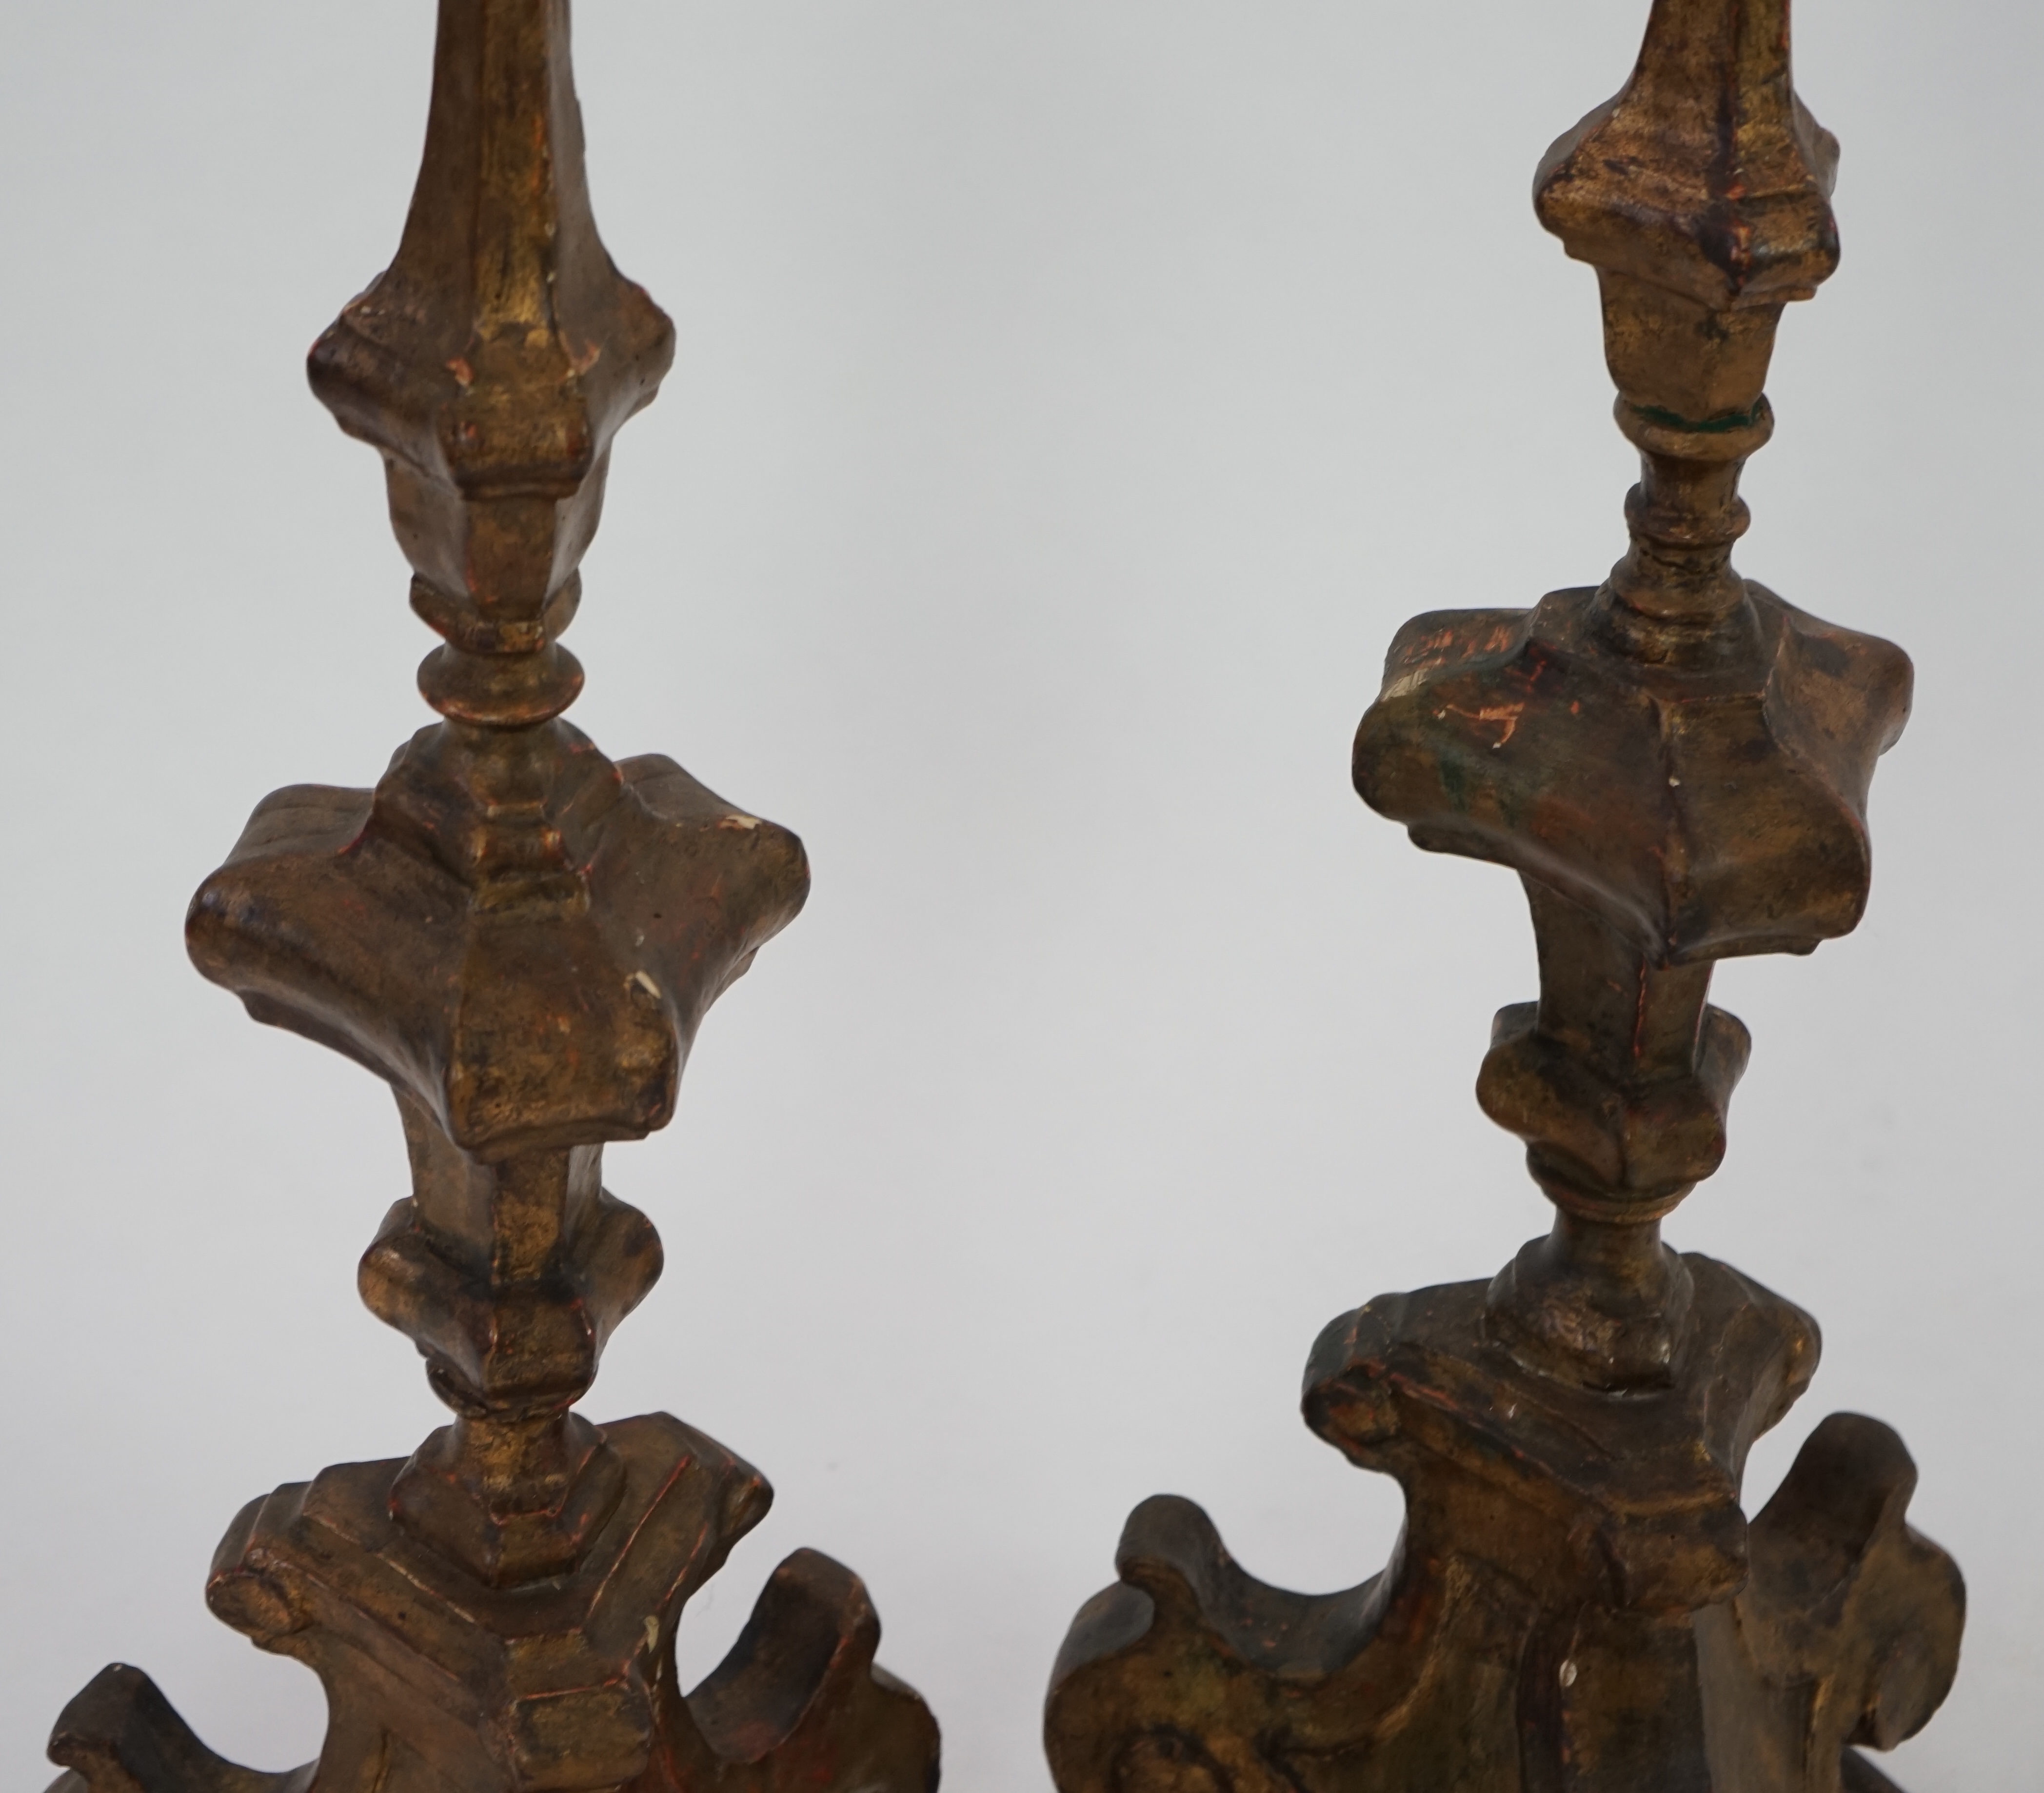 A pair of 18th century Italian giltwood candlesticks with knopped triangular stems and scroll feet, 89cm high. Condition - fair, Provenance- Brede Place, East Sussex, a former residence of the Frewen family from 1712-193